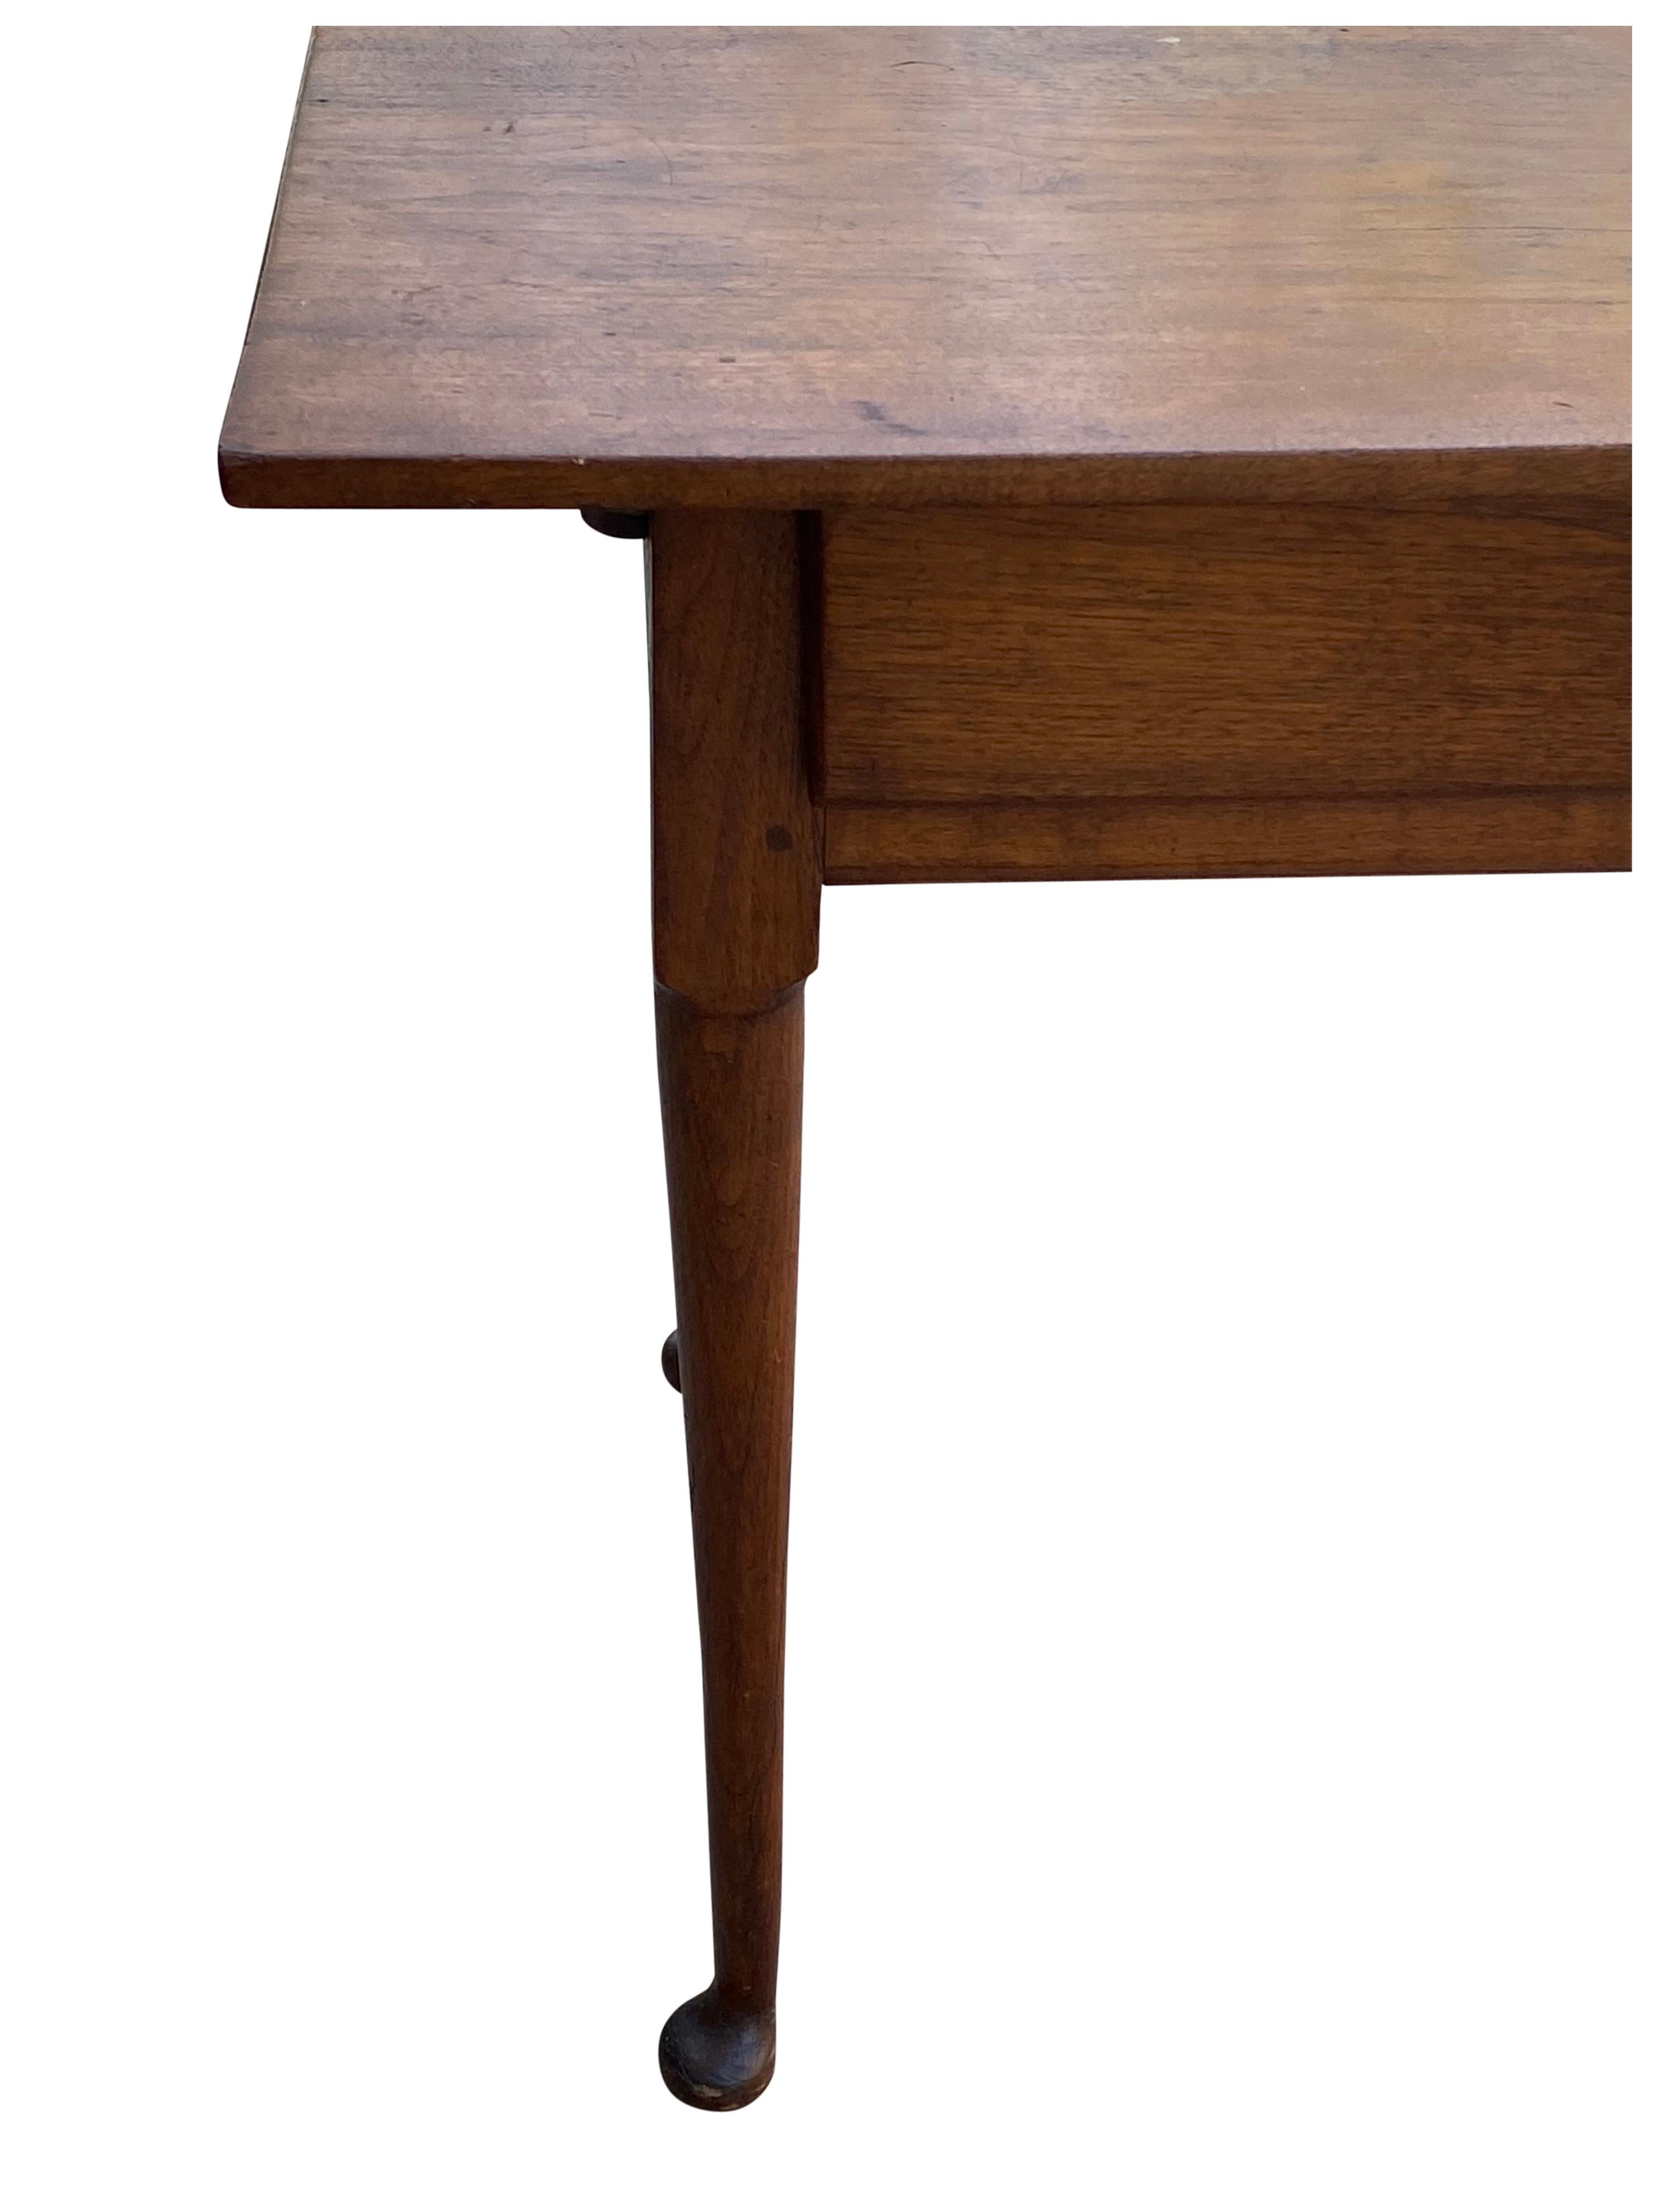 Fine American one-drawer pin top dressing table with slender Queen Anne style legs terminating in slipper feet. Circa late 18th Century. Having two board top and with cleats under the top holding the top to the base. Has a history with pioneer MESDA